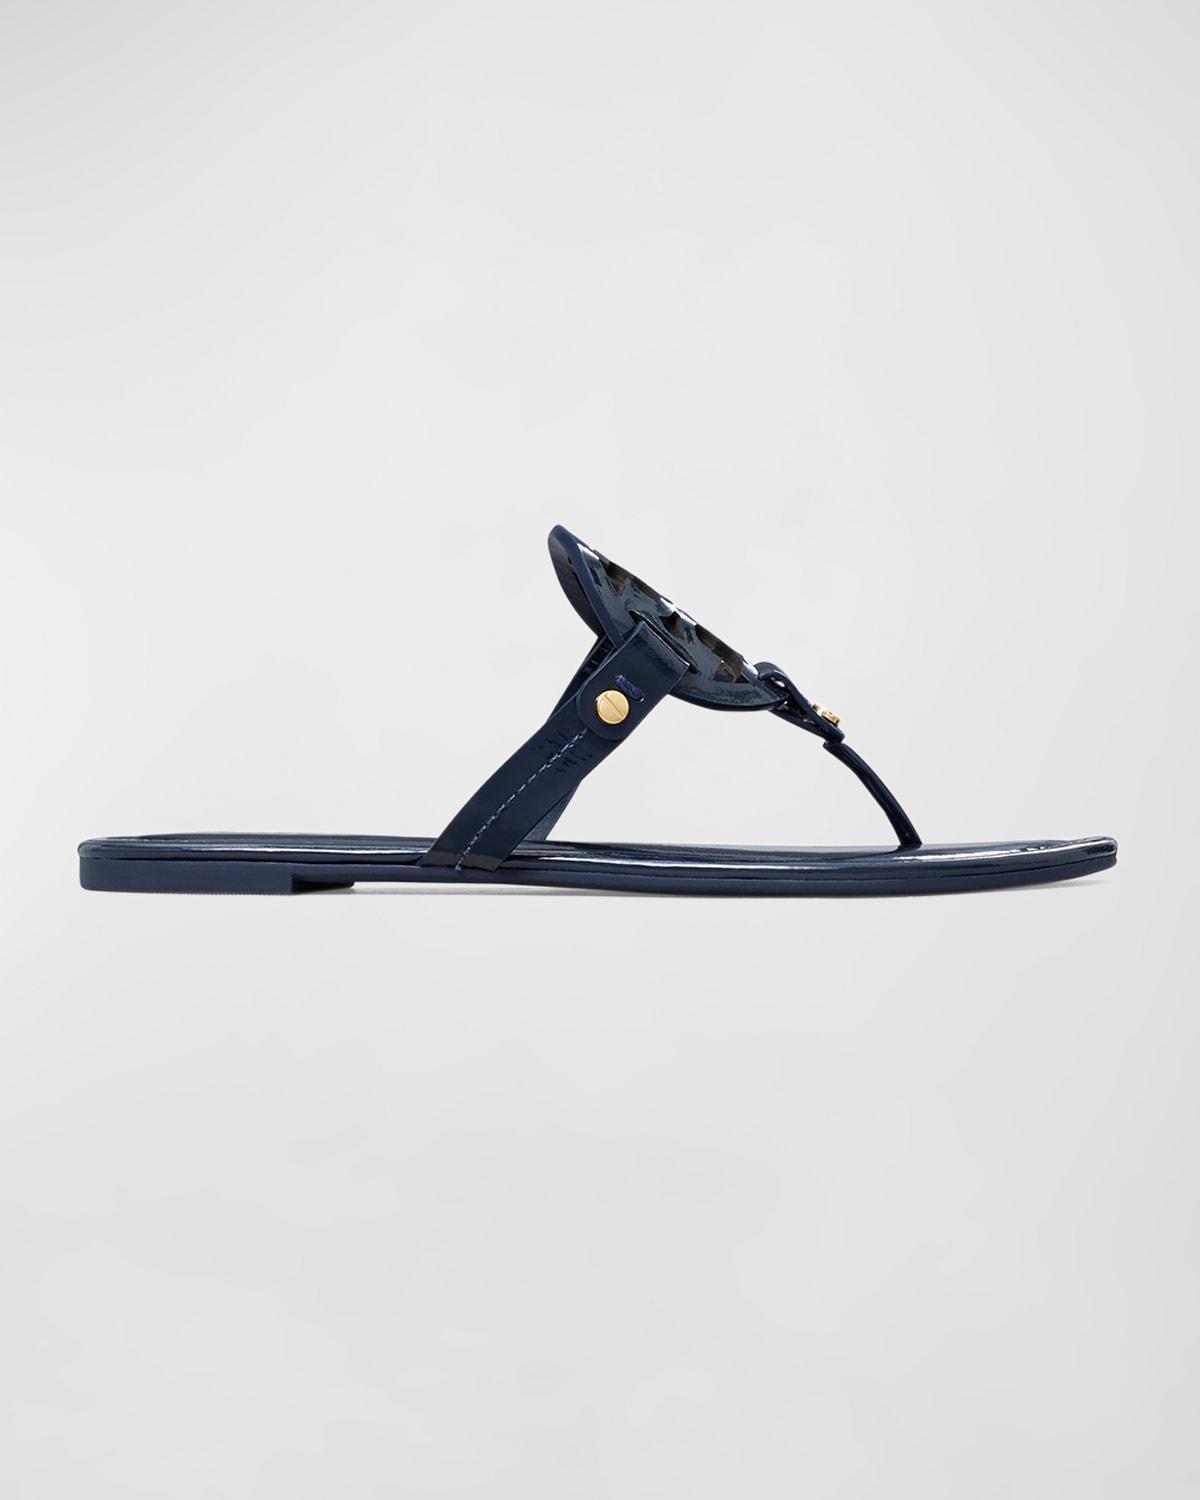 Miller Patent Leather Sandals Product Image